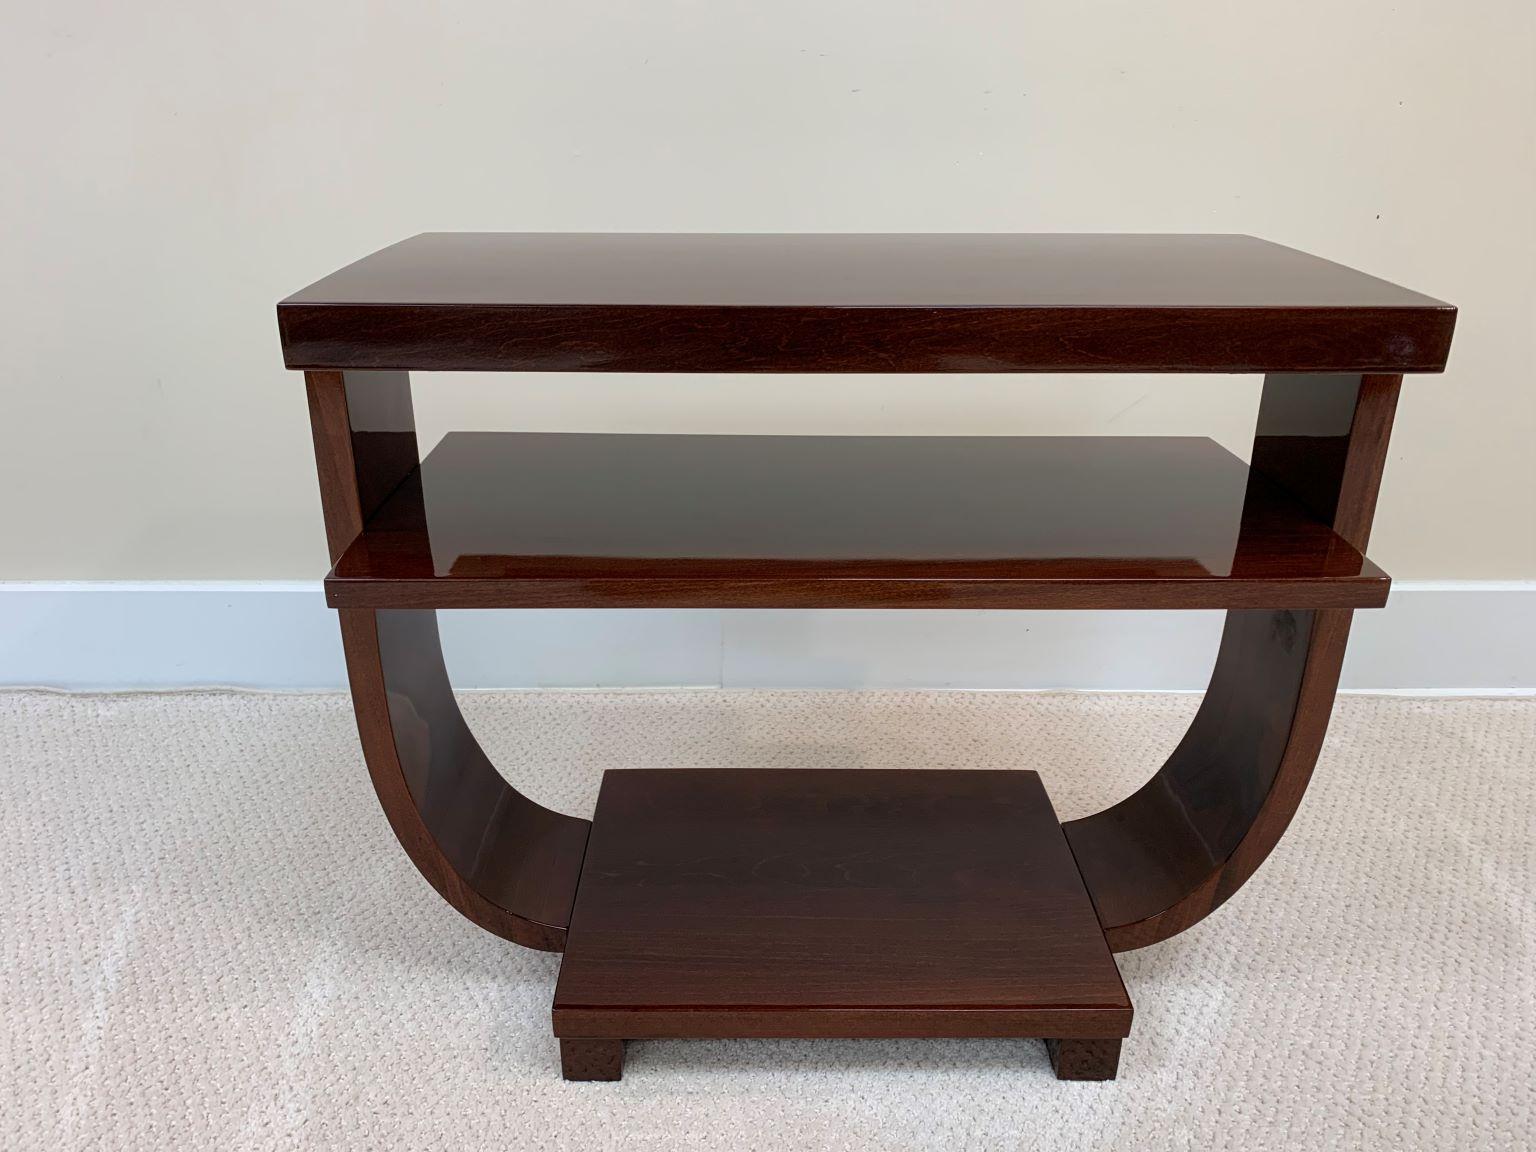 Maple Art Deco Machine Age End Tables by Modernage Furniture Company, Circa 1930's